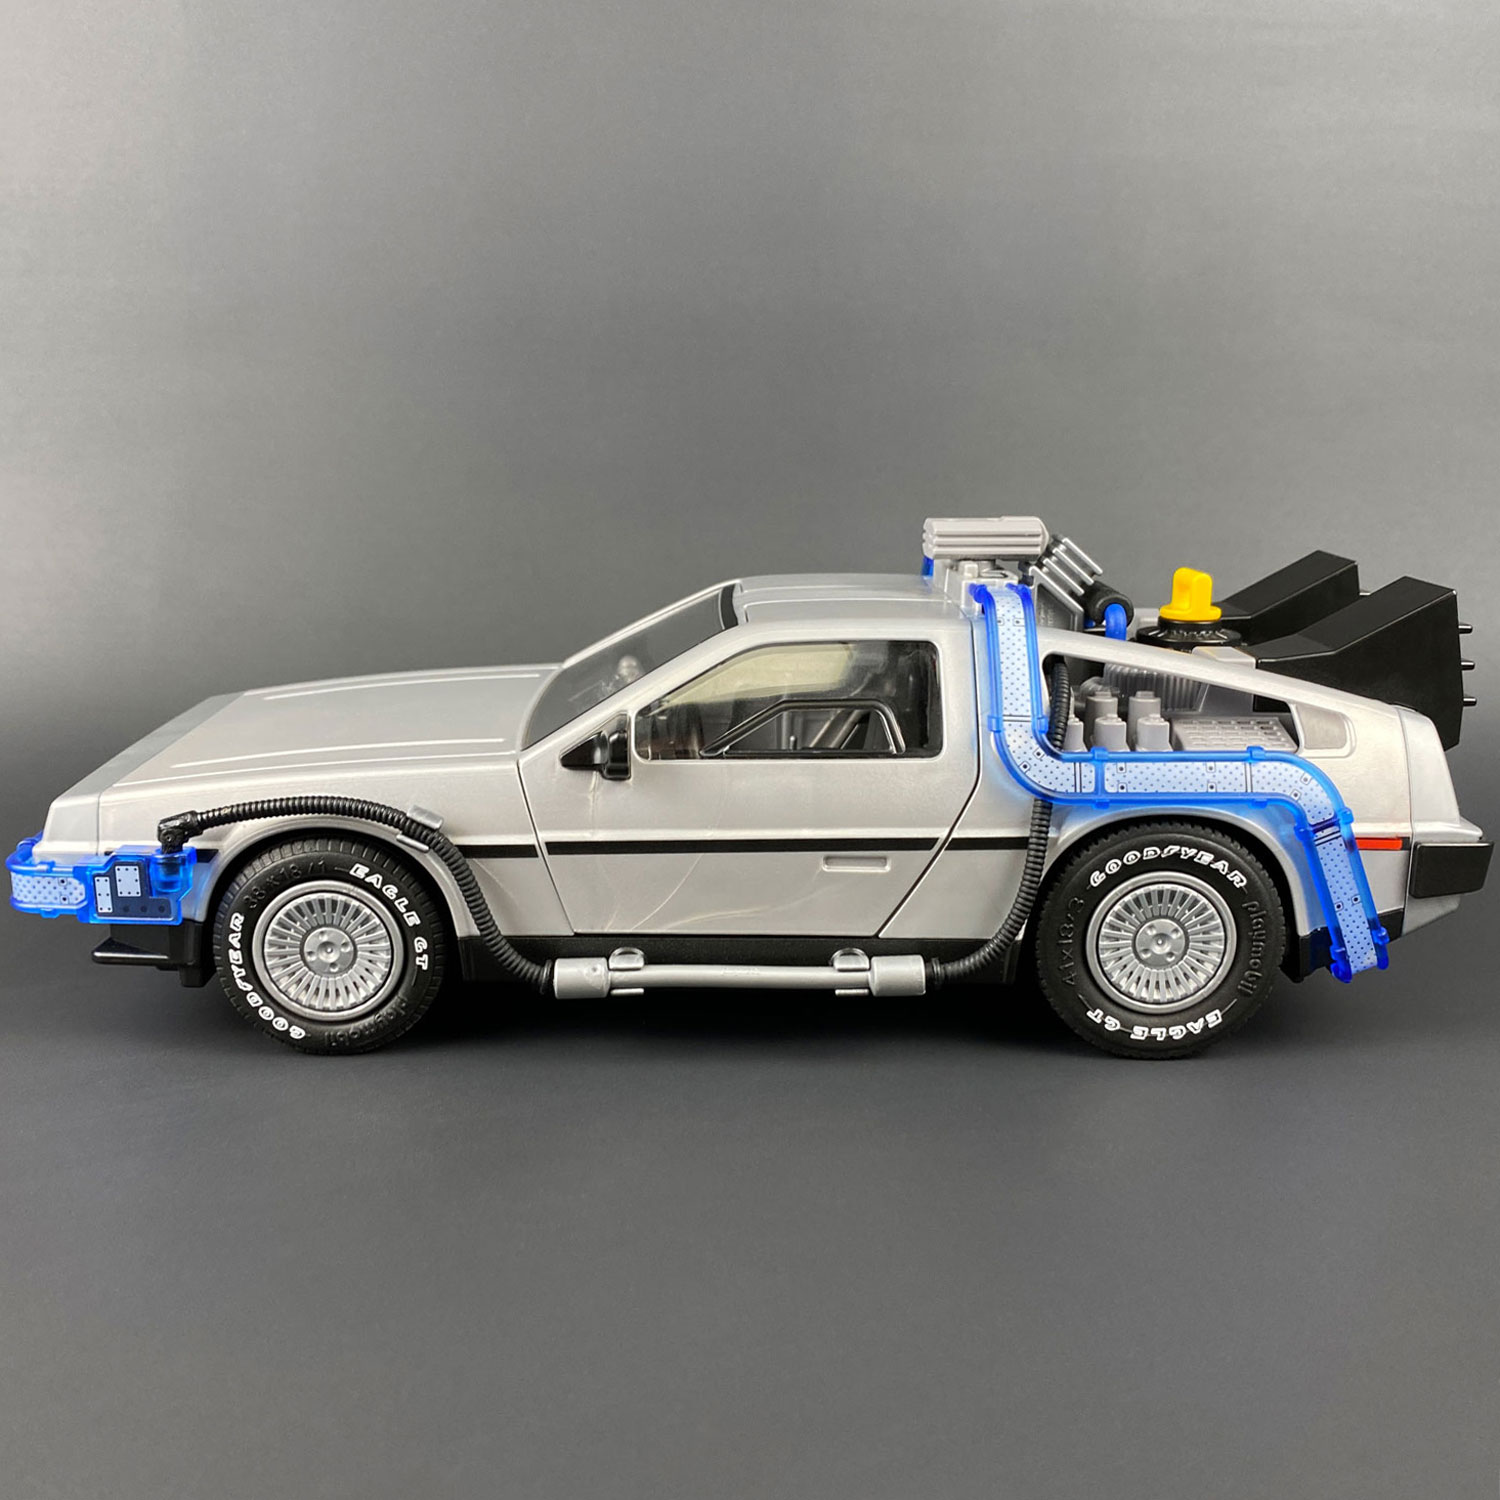 Side photo of Playmobil DeLorean with Tyre Transfers mod added